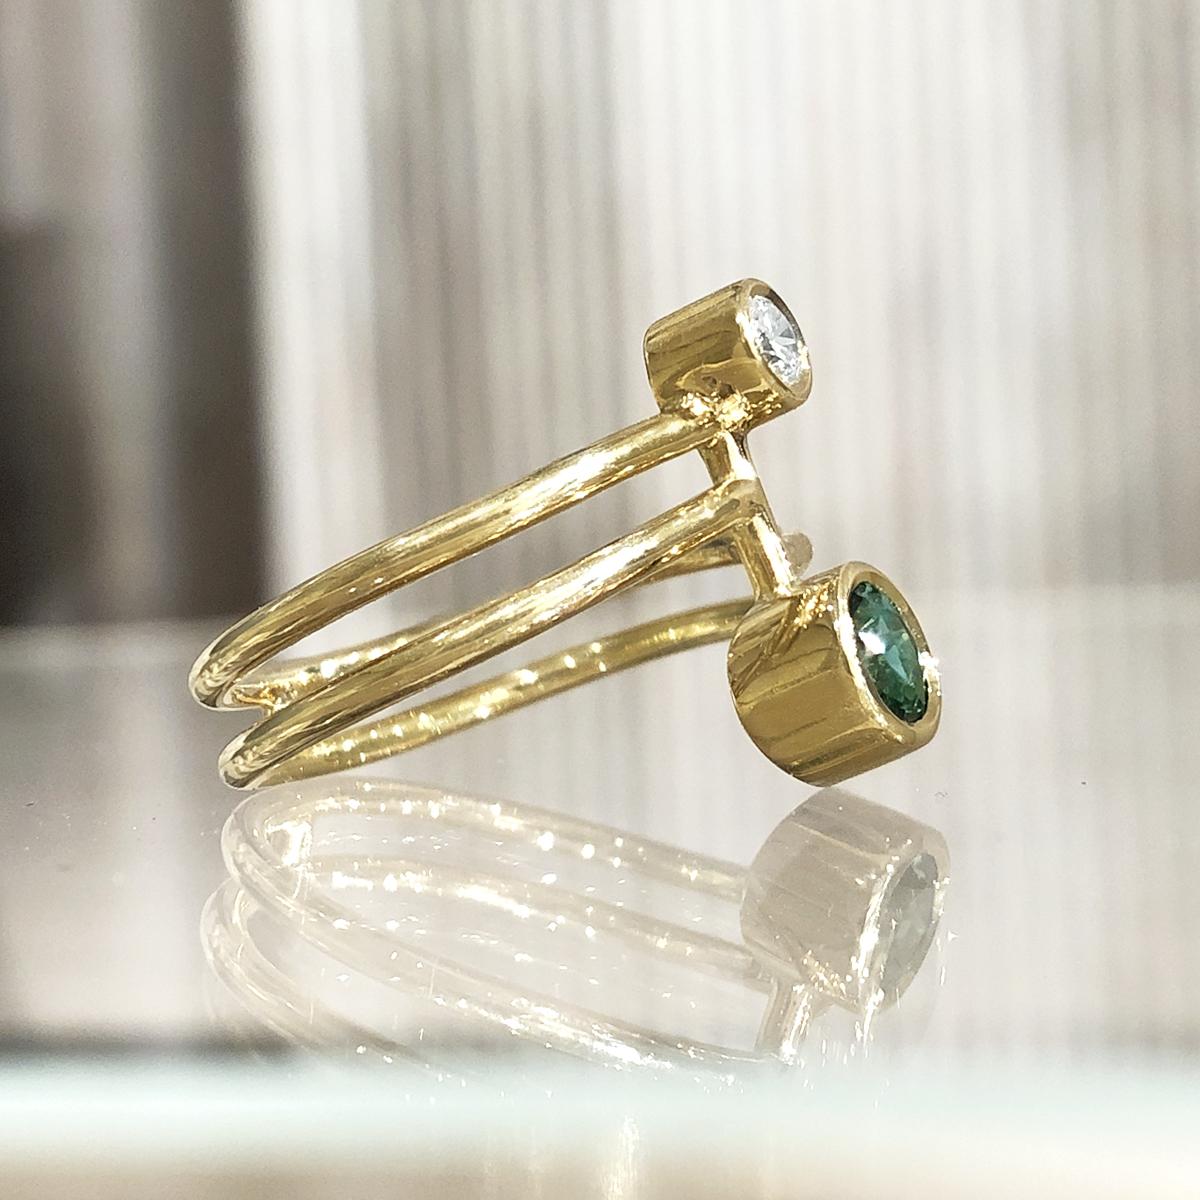 One of a Kind Double Stone Ring hand-fabricated in London by acclaimed jewellery maker Shimell and Madden in high-polished 18k yellow gold featuring a stunning 5mm faceted round blue green tourmaline accented by a 0.14 carat round brilliant-cut